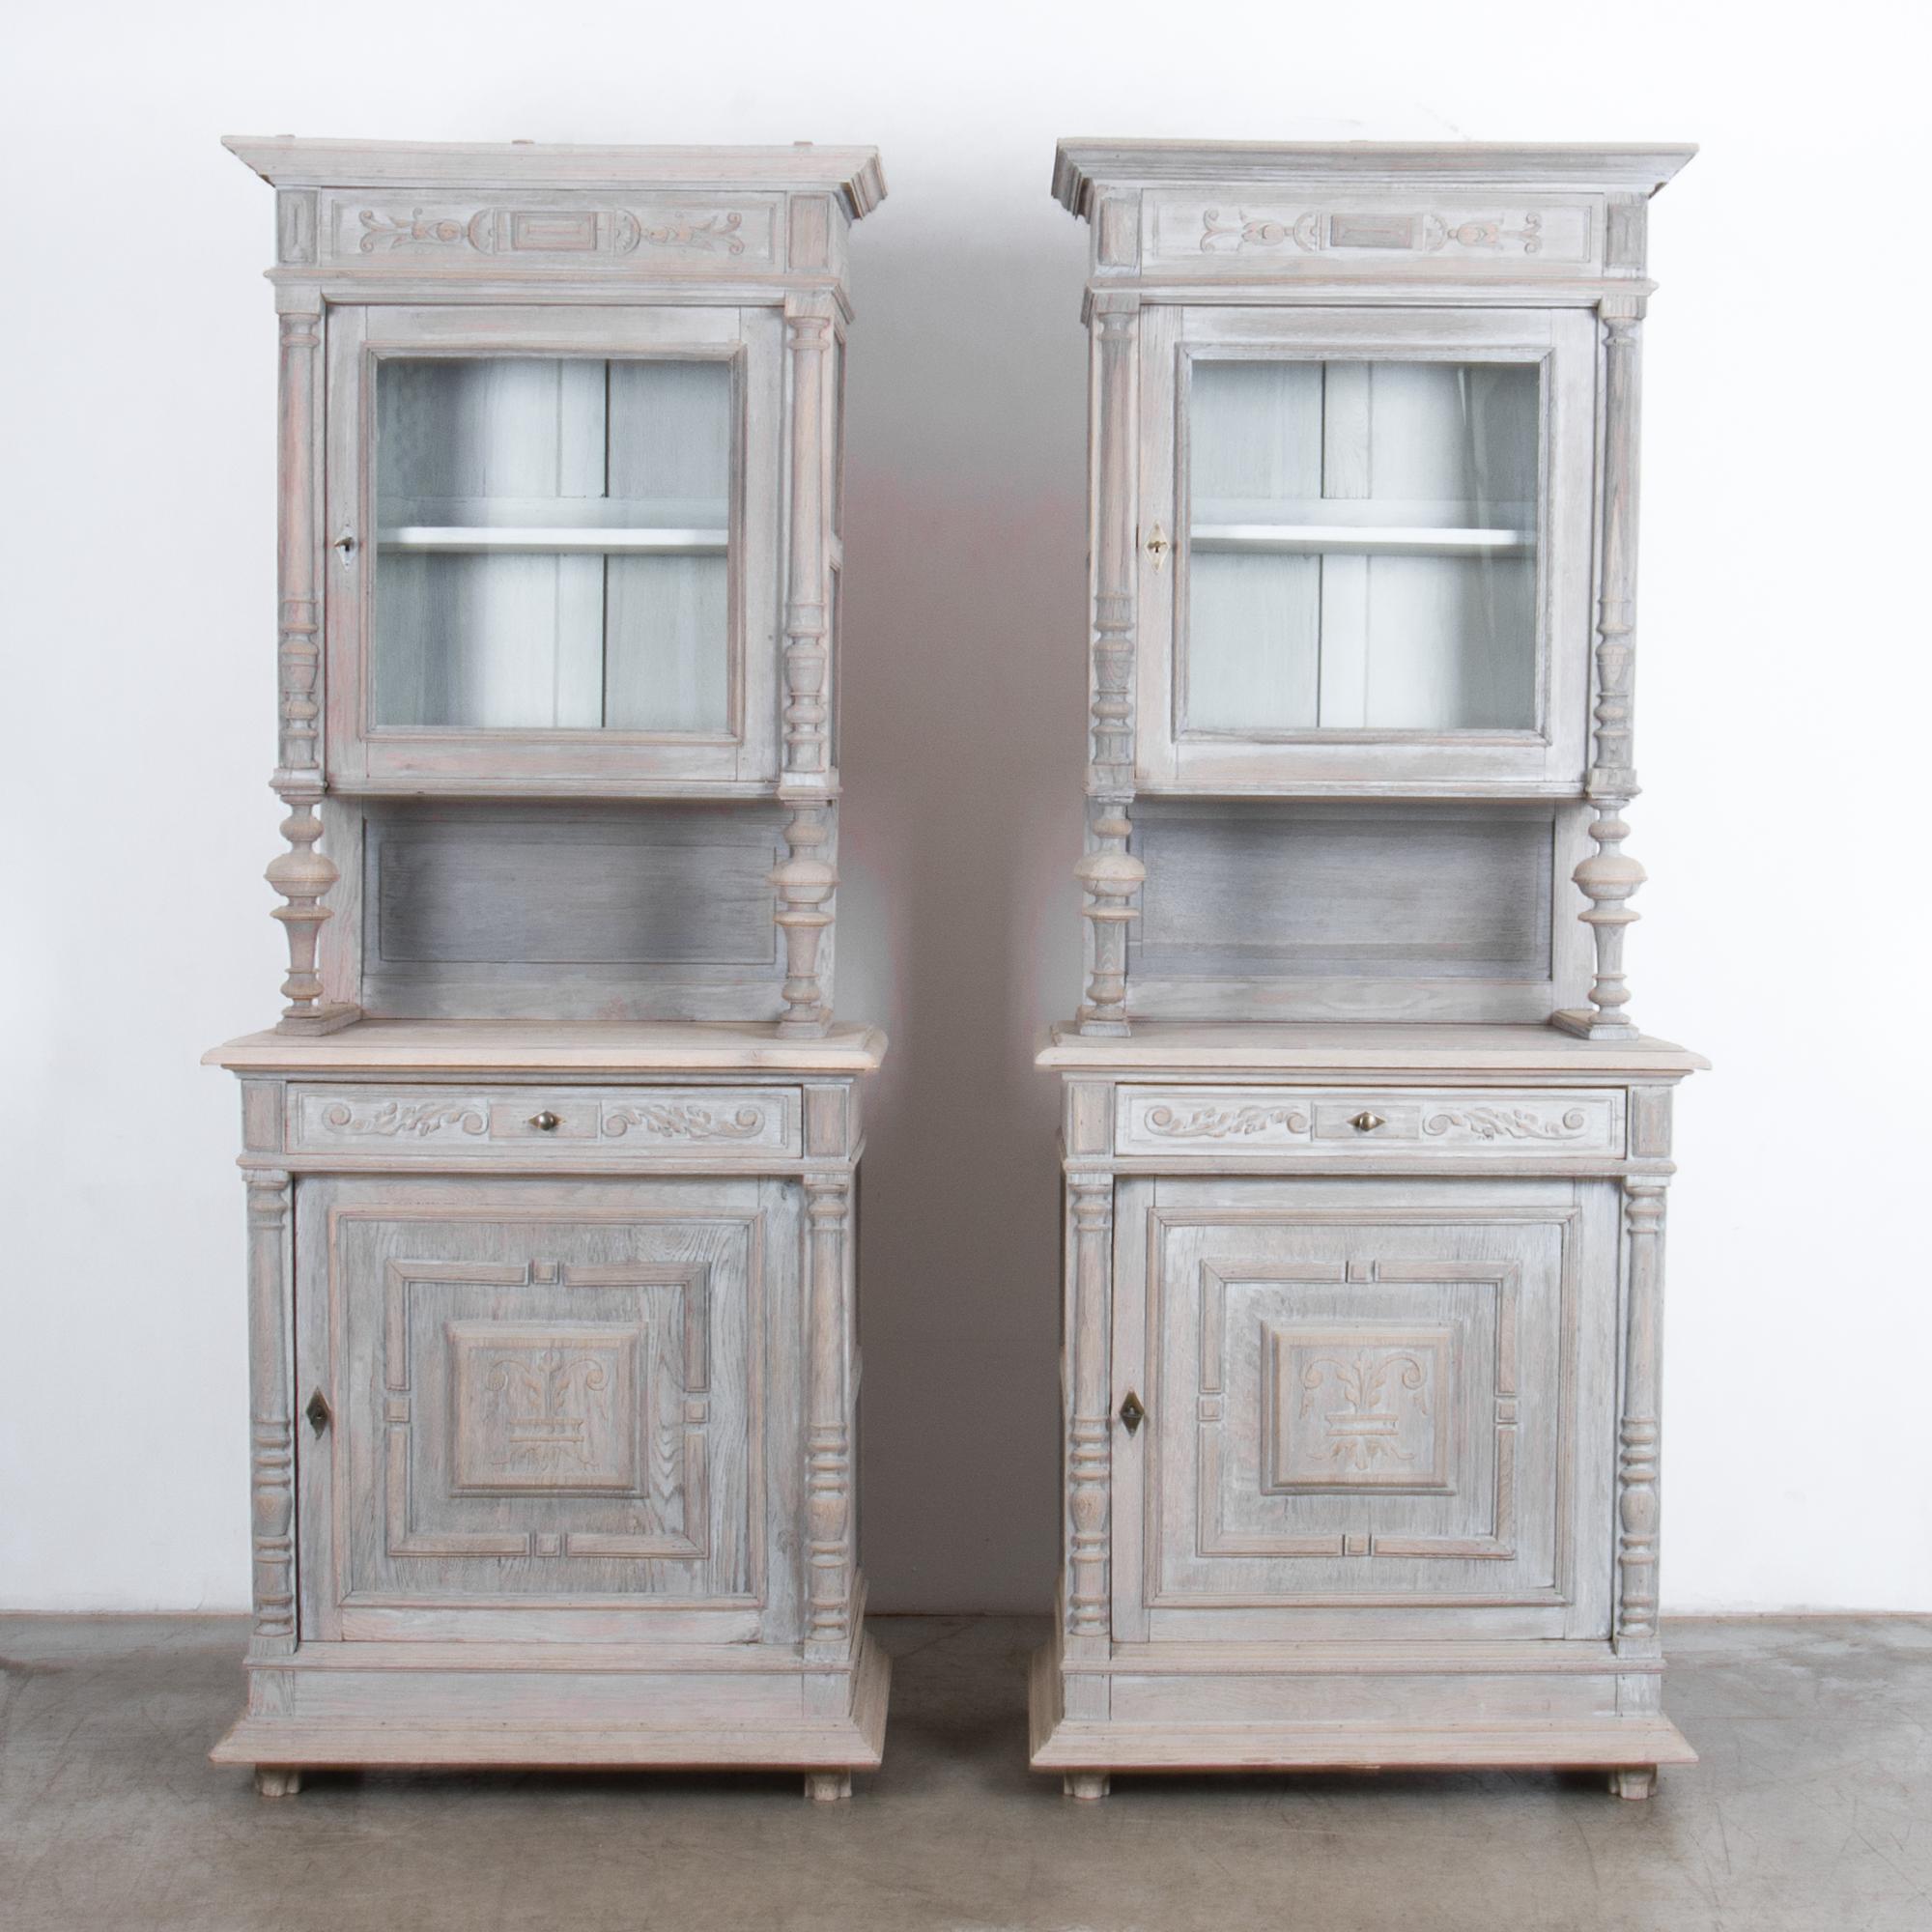 With a distinct French Provincial style, a pair of door and drawer buffet cabinets with integrated glass display storage. Featuring ornate carved frame and drawer panels, the bleached finish completely this piece, with a textured neutral color,